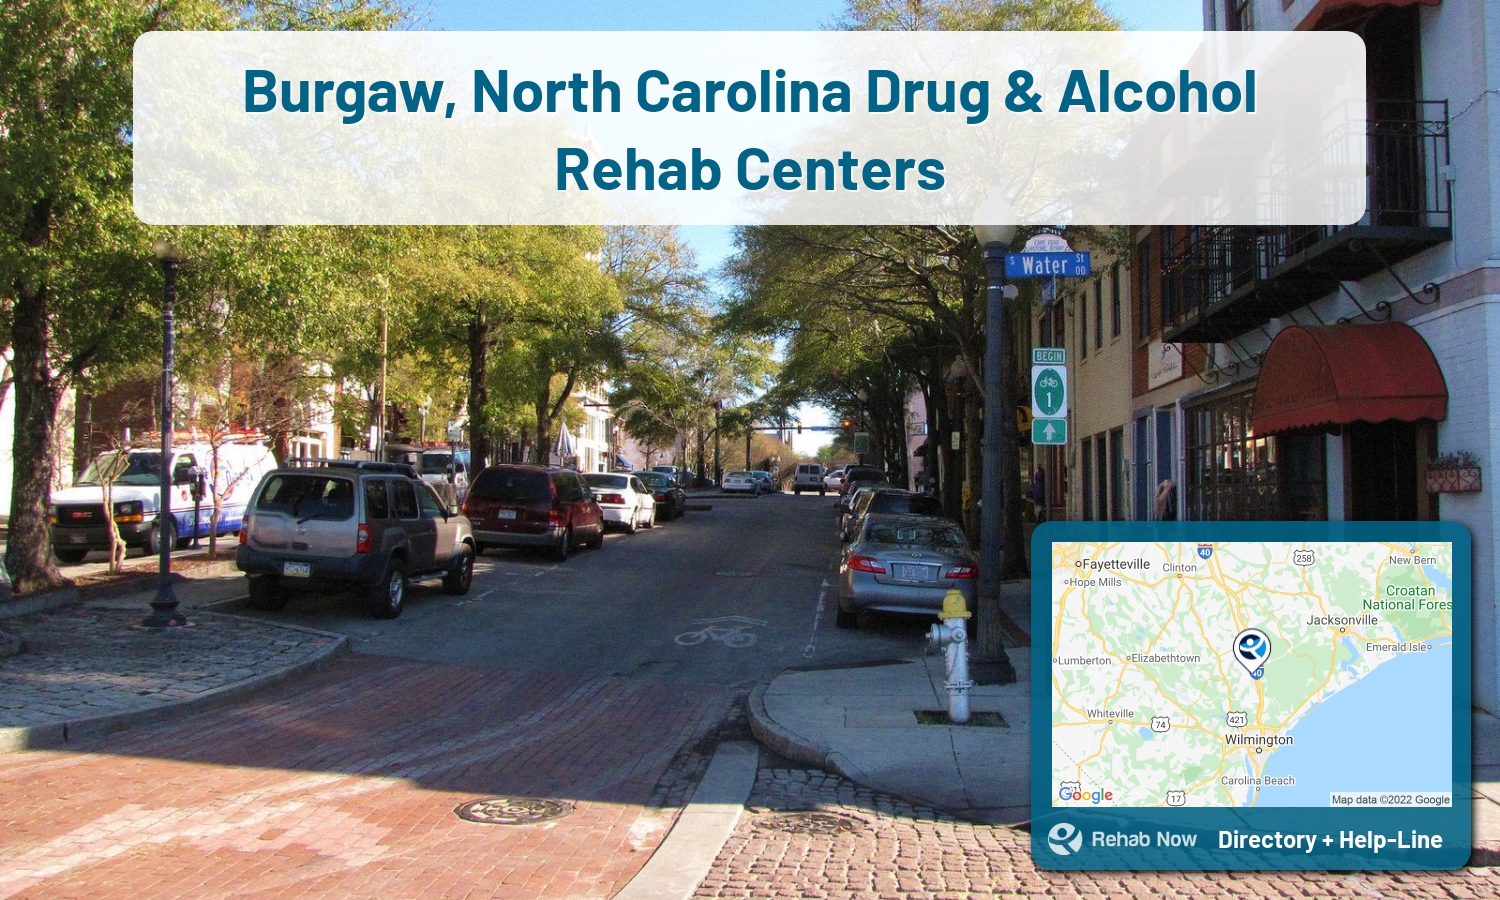 View options, availability, treatment methods, and more, for drug rehab and alcohol treatment in Burgaw, North Carolina